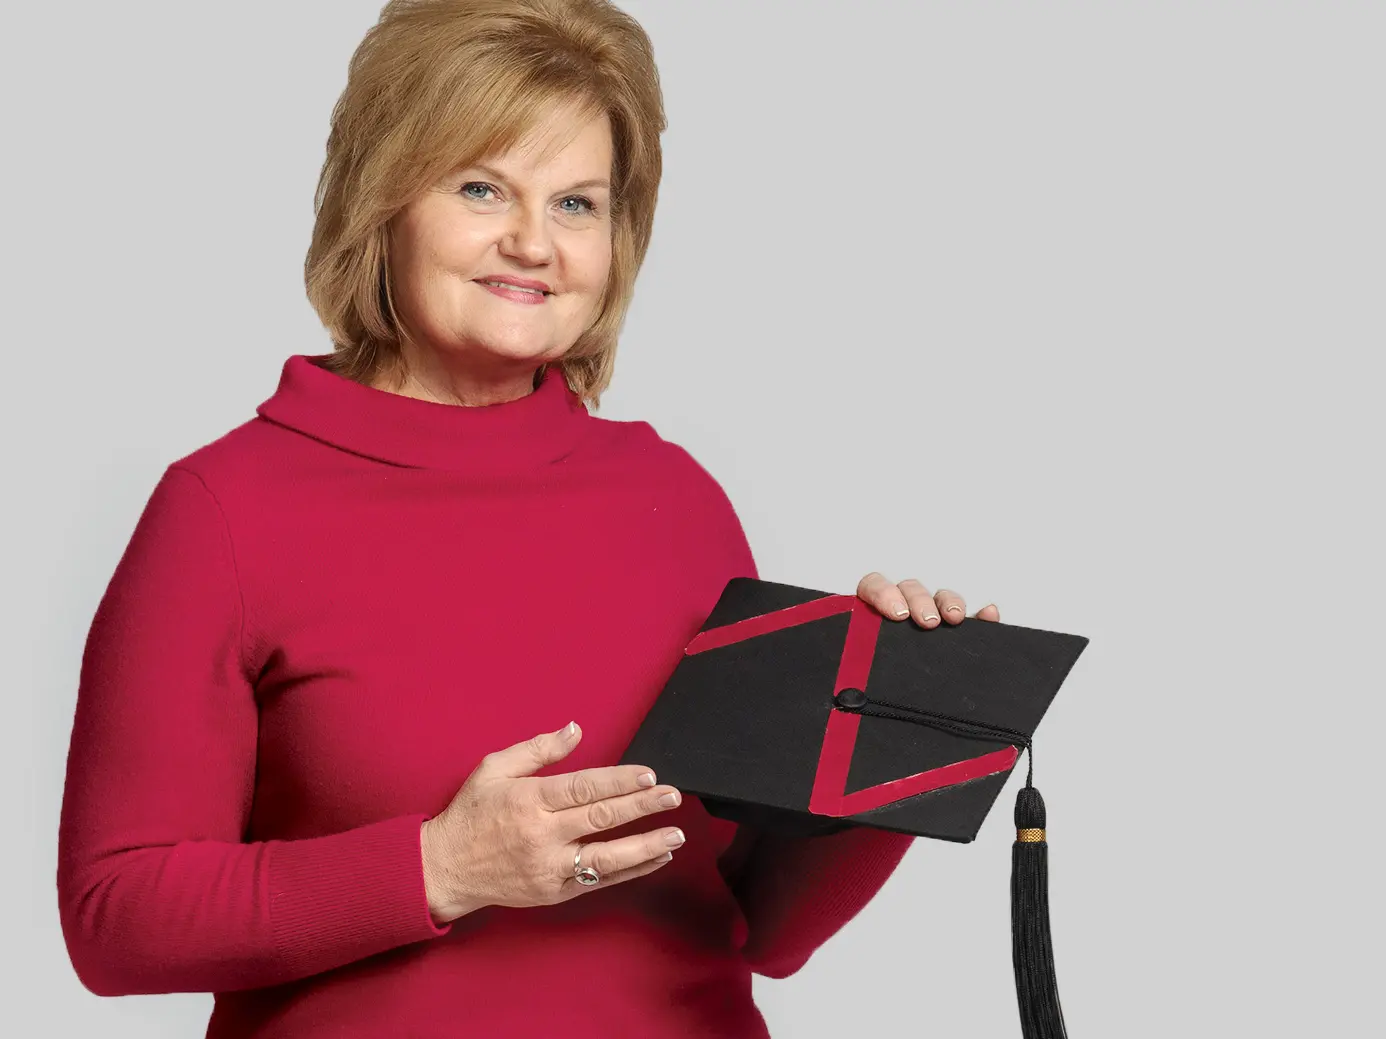 A smiling woman wears red and holds a mortarboard